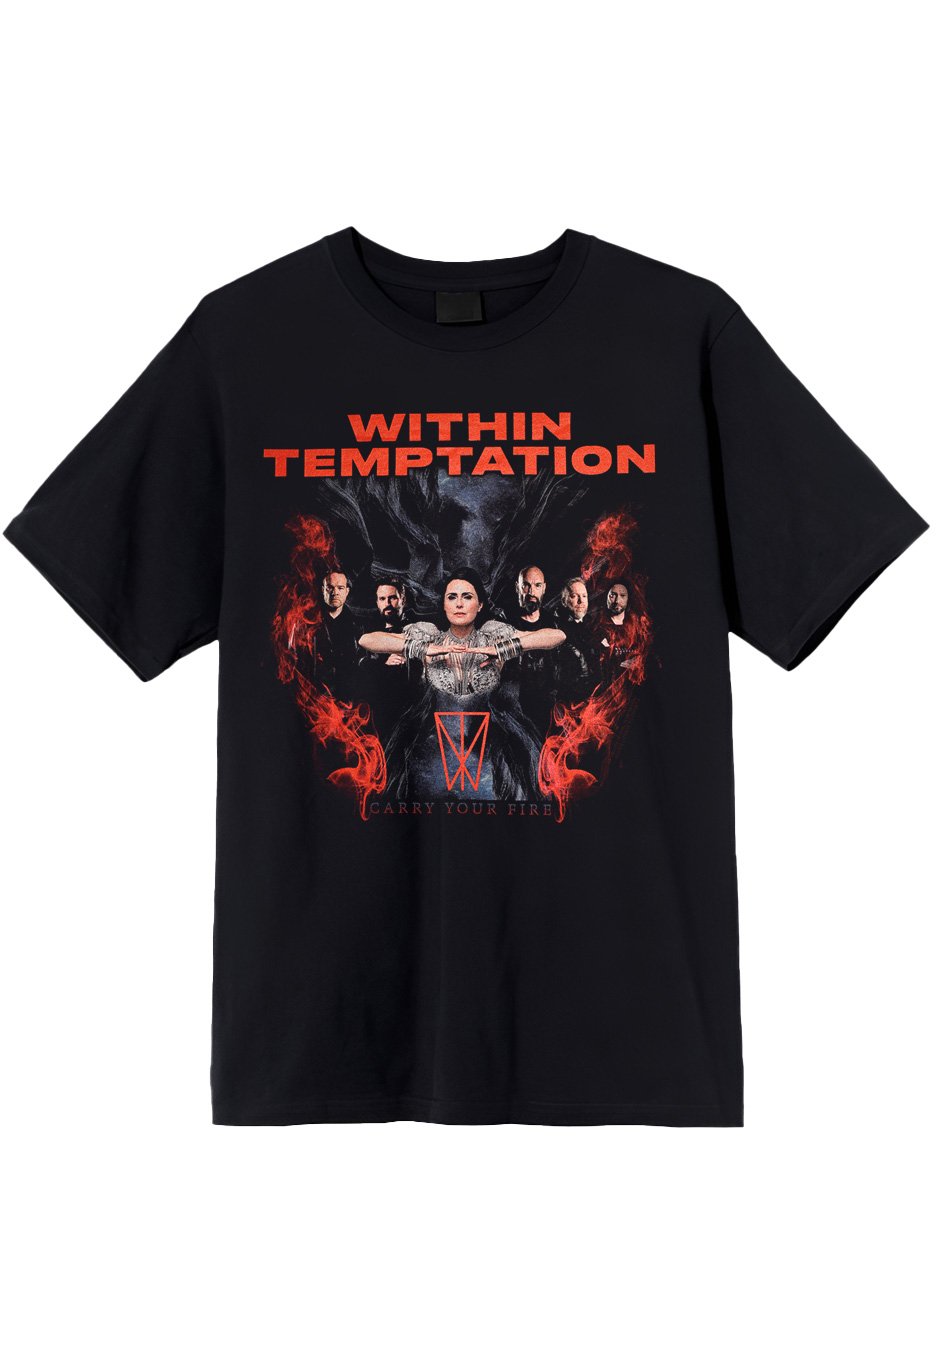 Within Temptation - Carry Fire Tour 2022 - T-Shirt